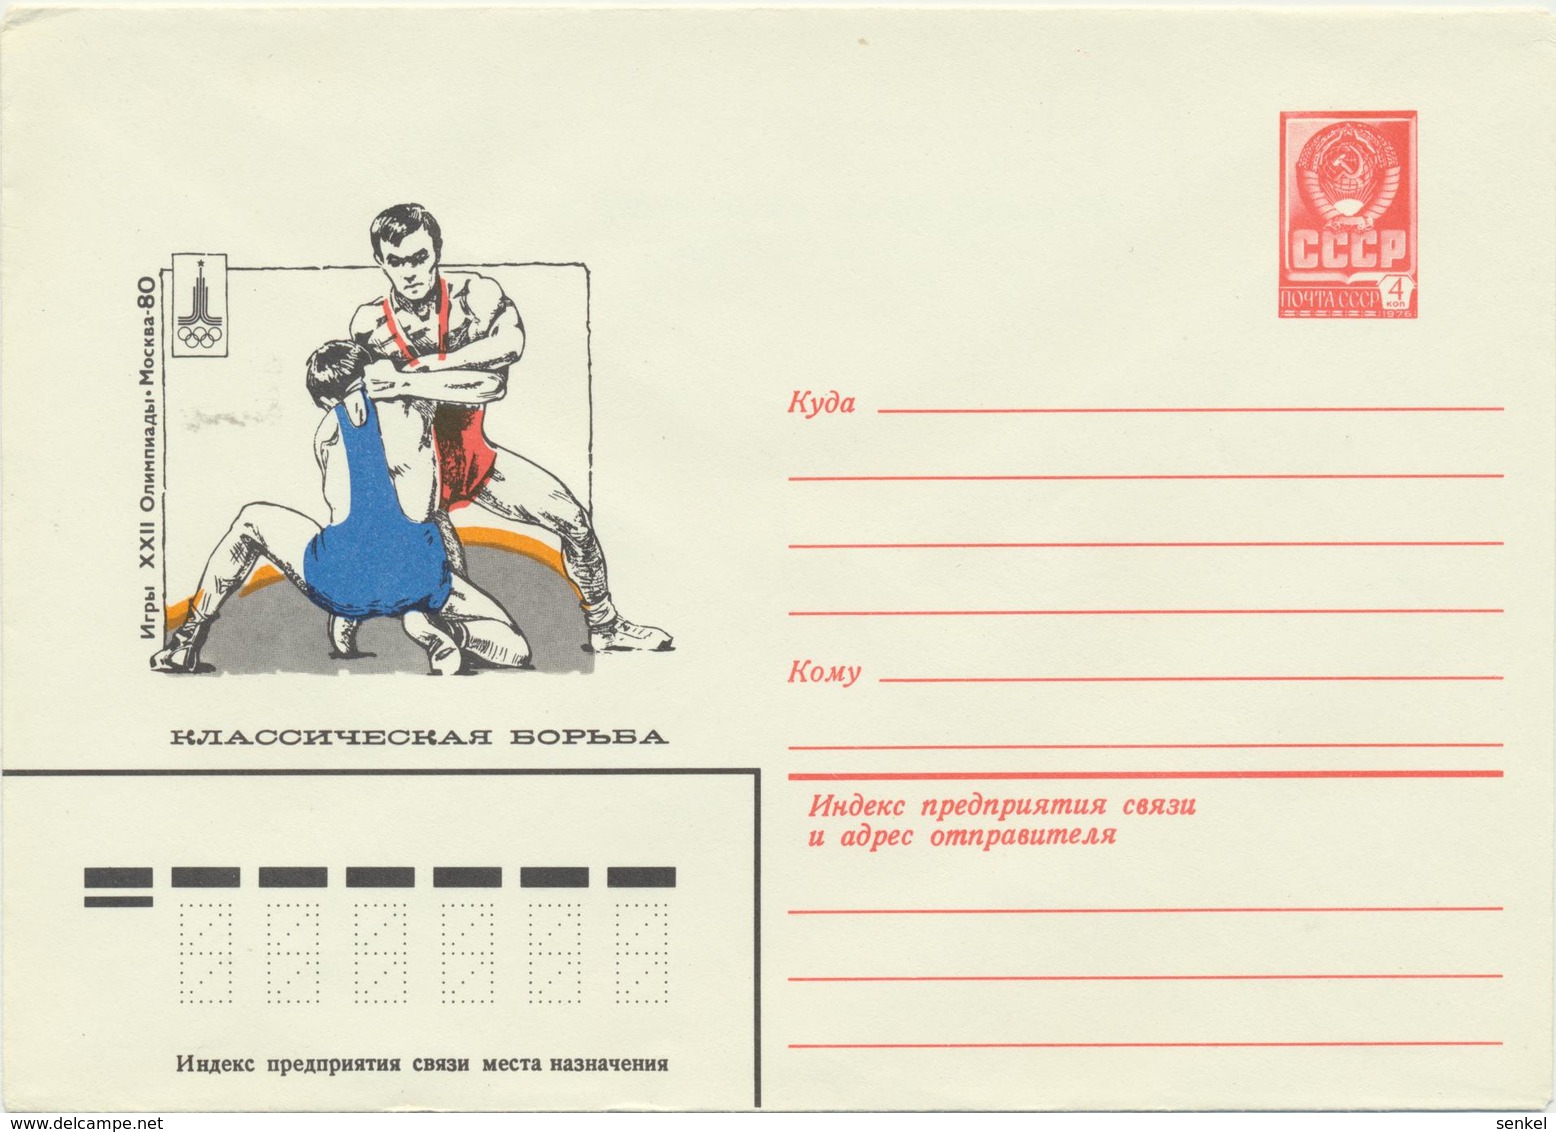 45-715 Russia USSR Postal Stationery Cover 1979 Moscow 1980 Olympics Classic Wrestling - 1970-79